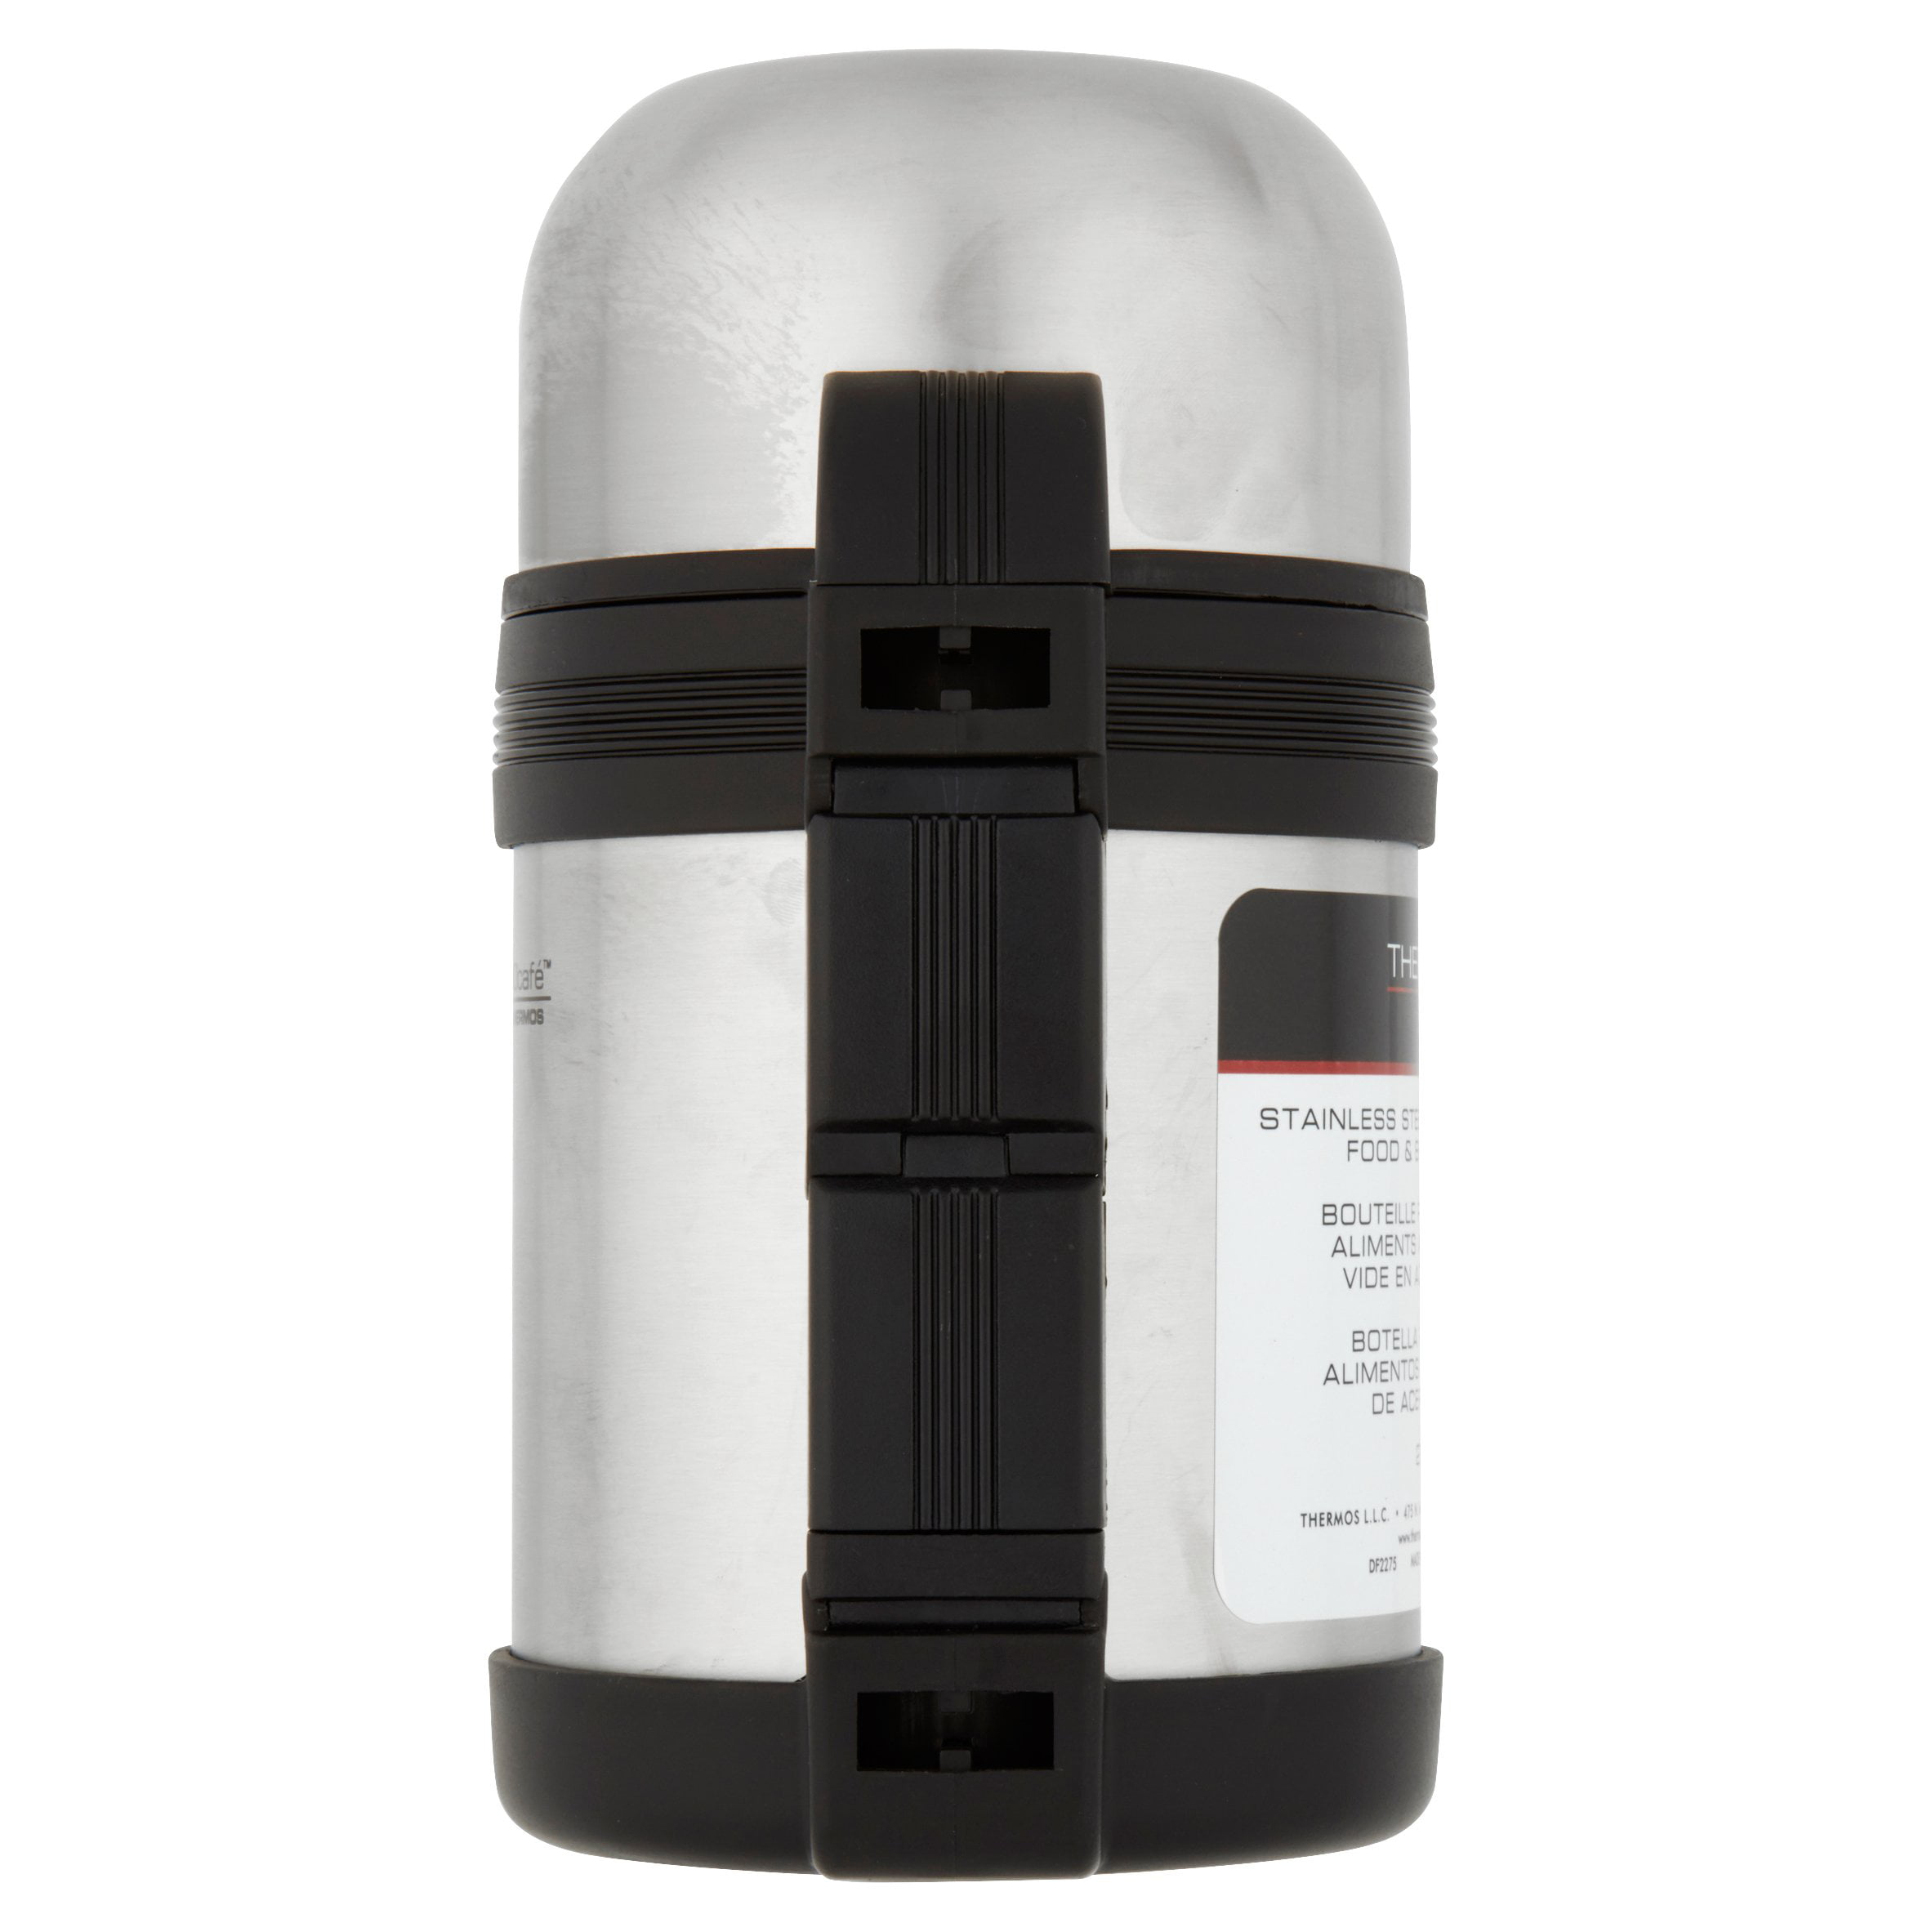 SSAWcasa Dual Layer Soup Thermos, 27-Ounce